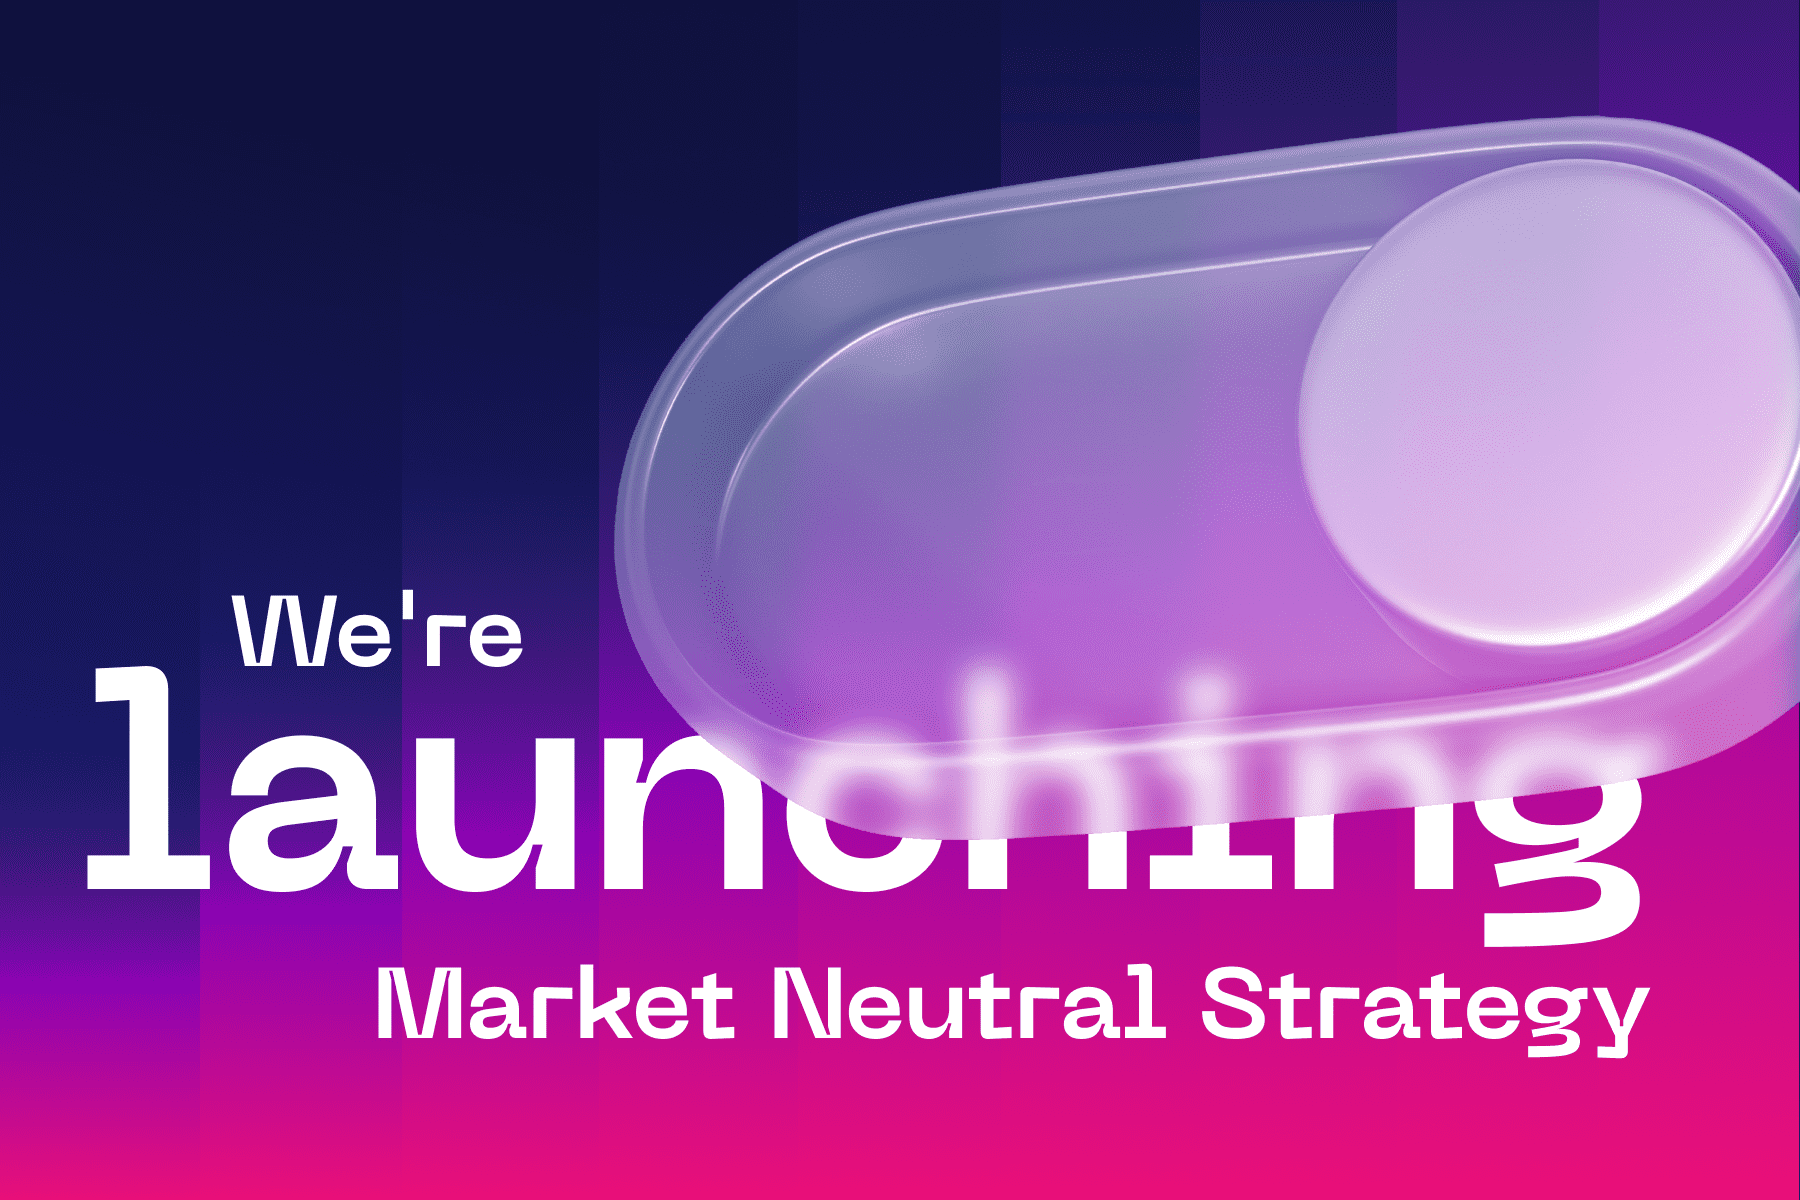 Stoic Team to Launch a Market Neutral Strategy